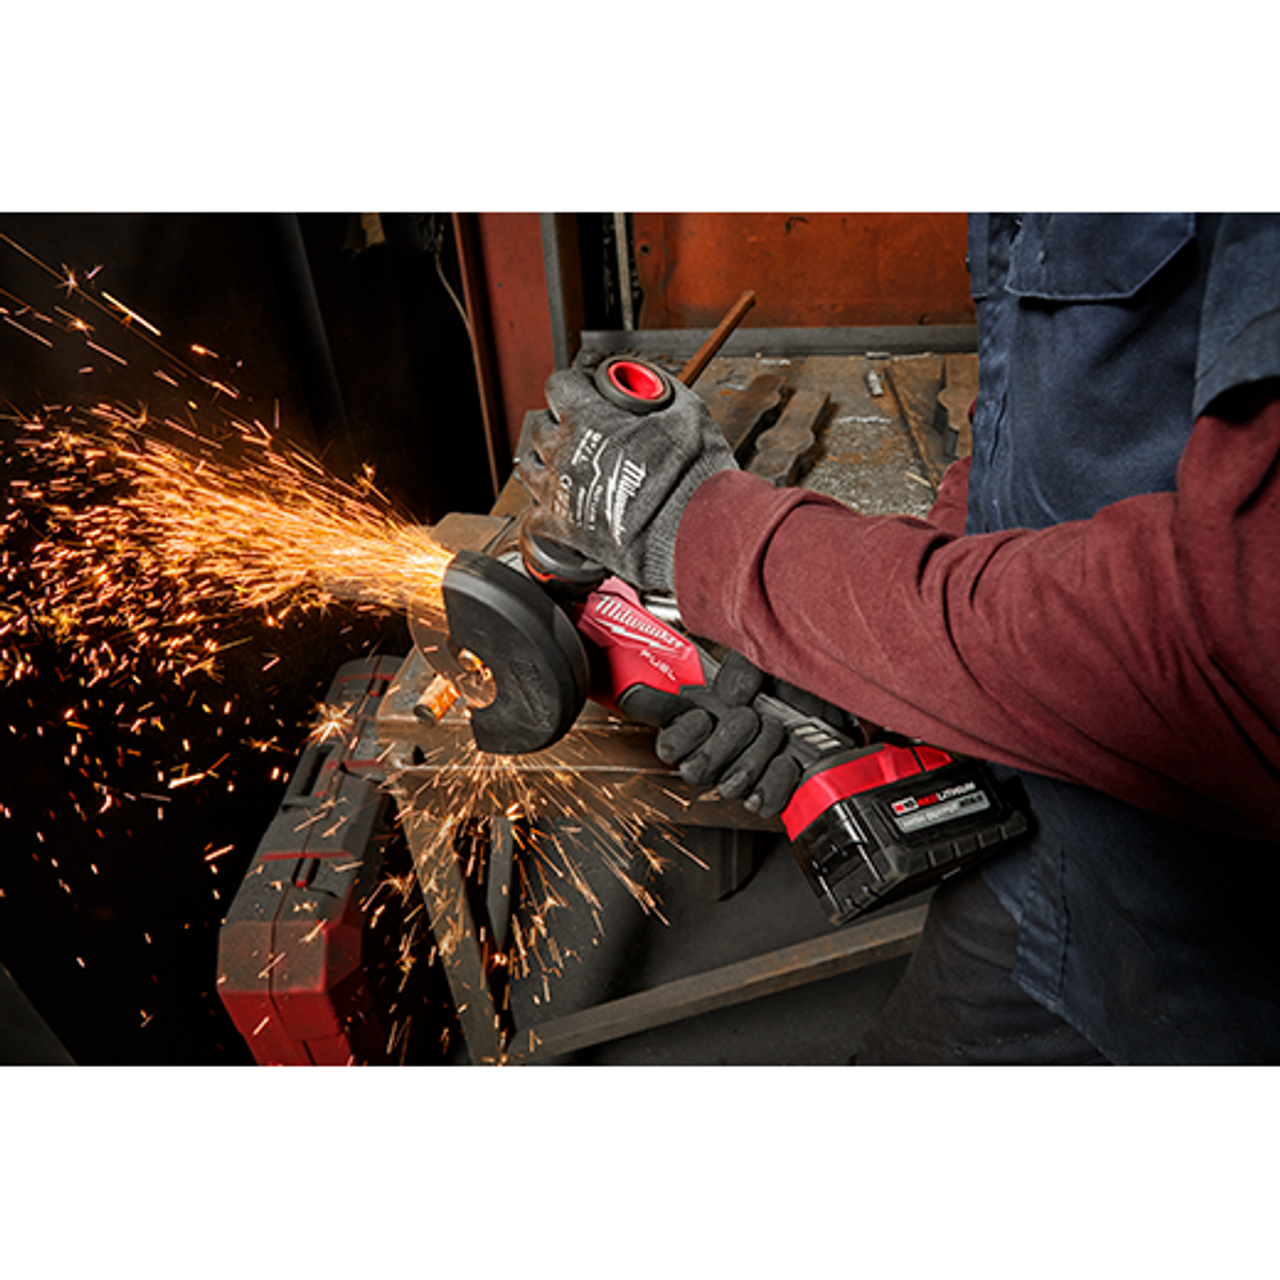 Milwaukee 2880-20 M18 FUEL™ 4-1/2/5 Grinder Paddle Switch, No-Lock, Bare  Tool